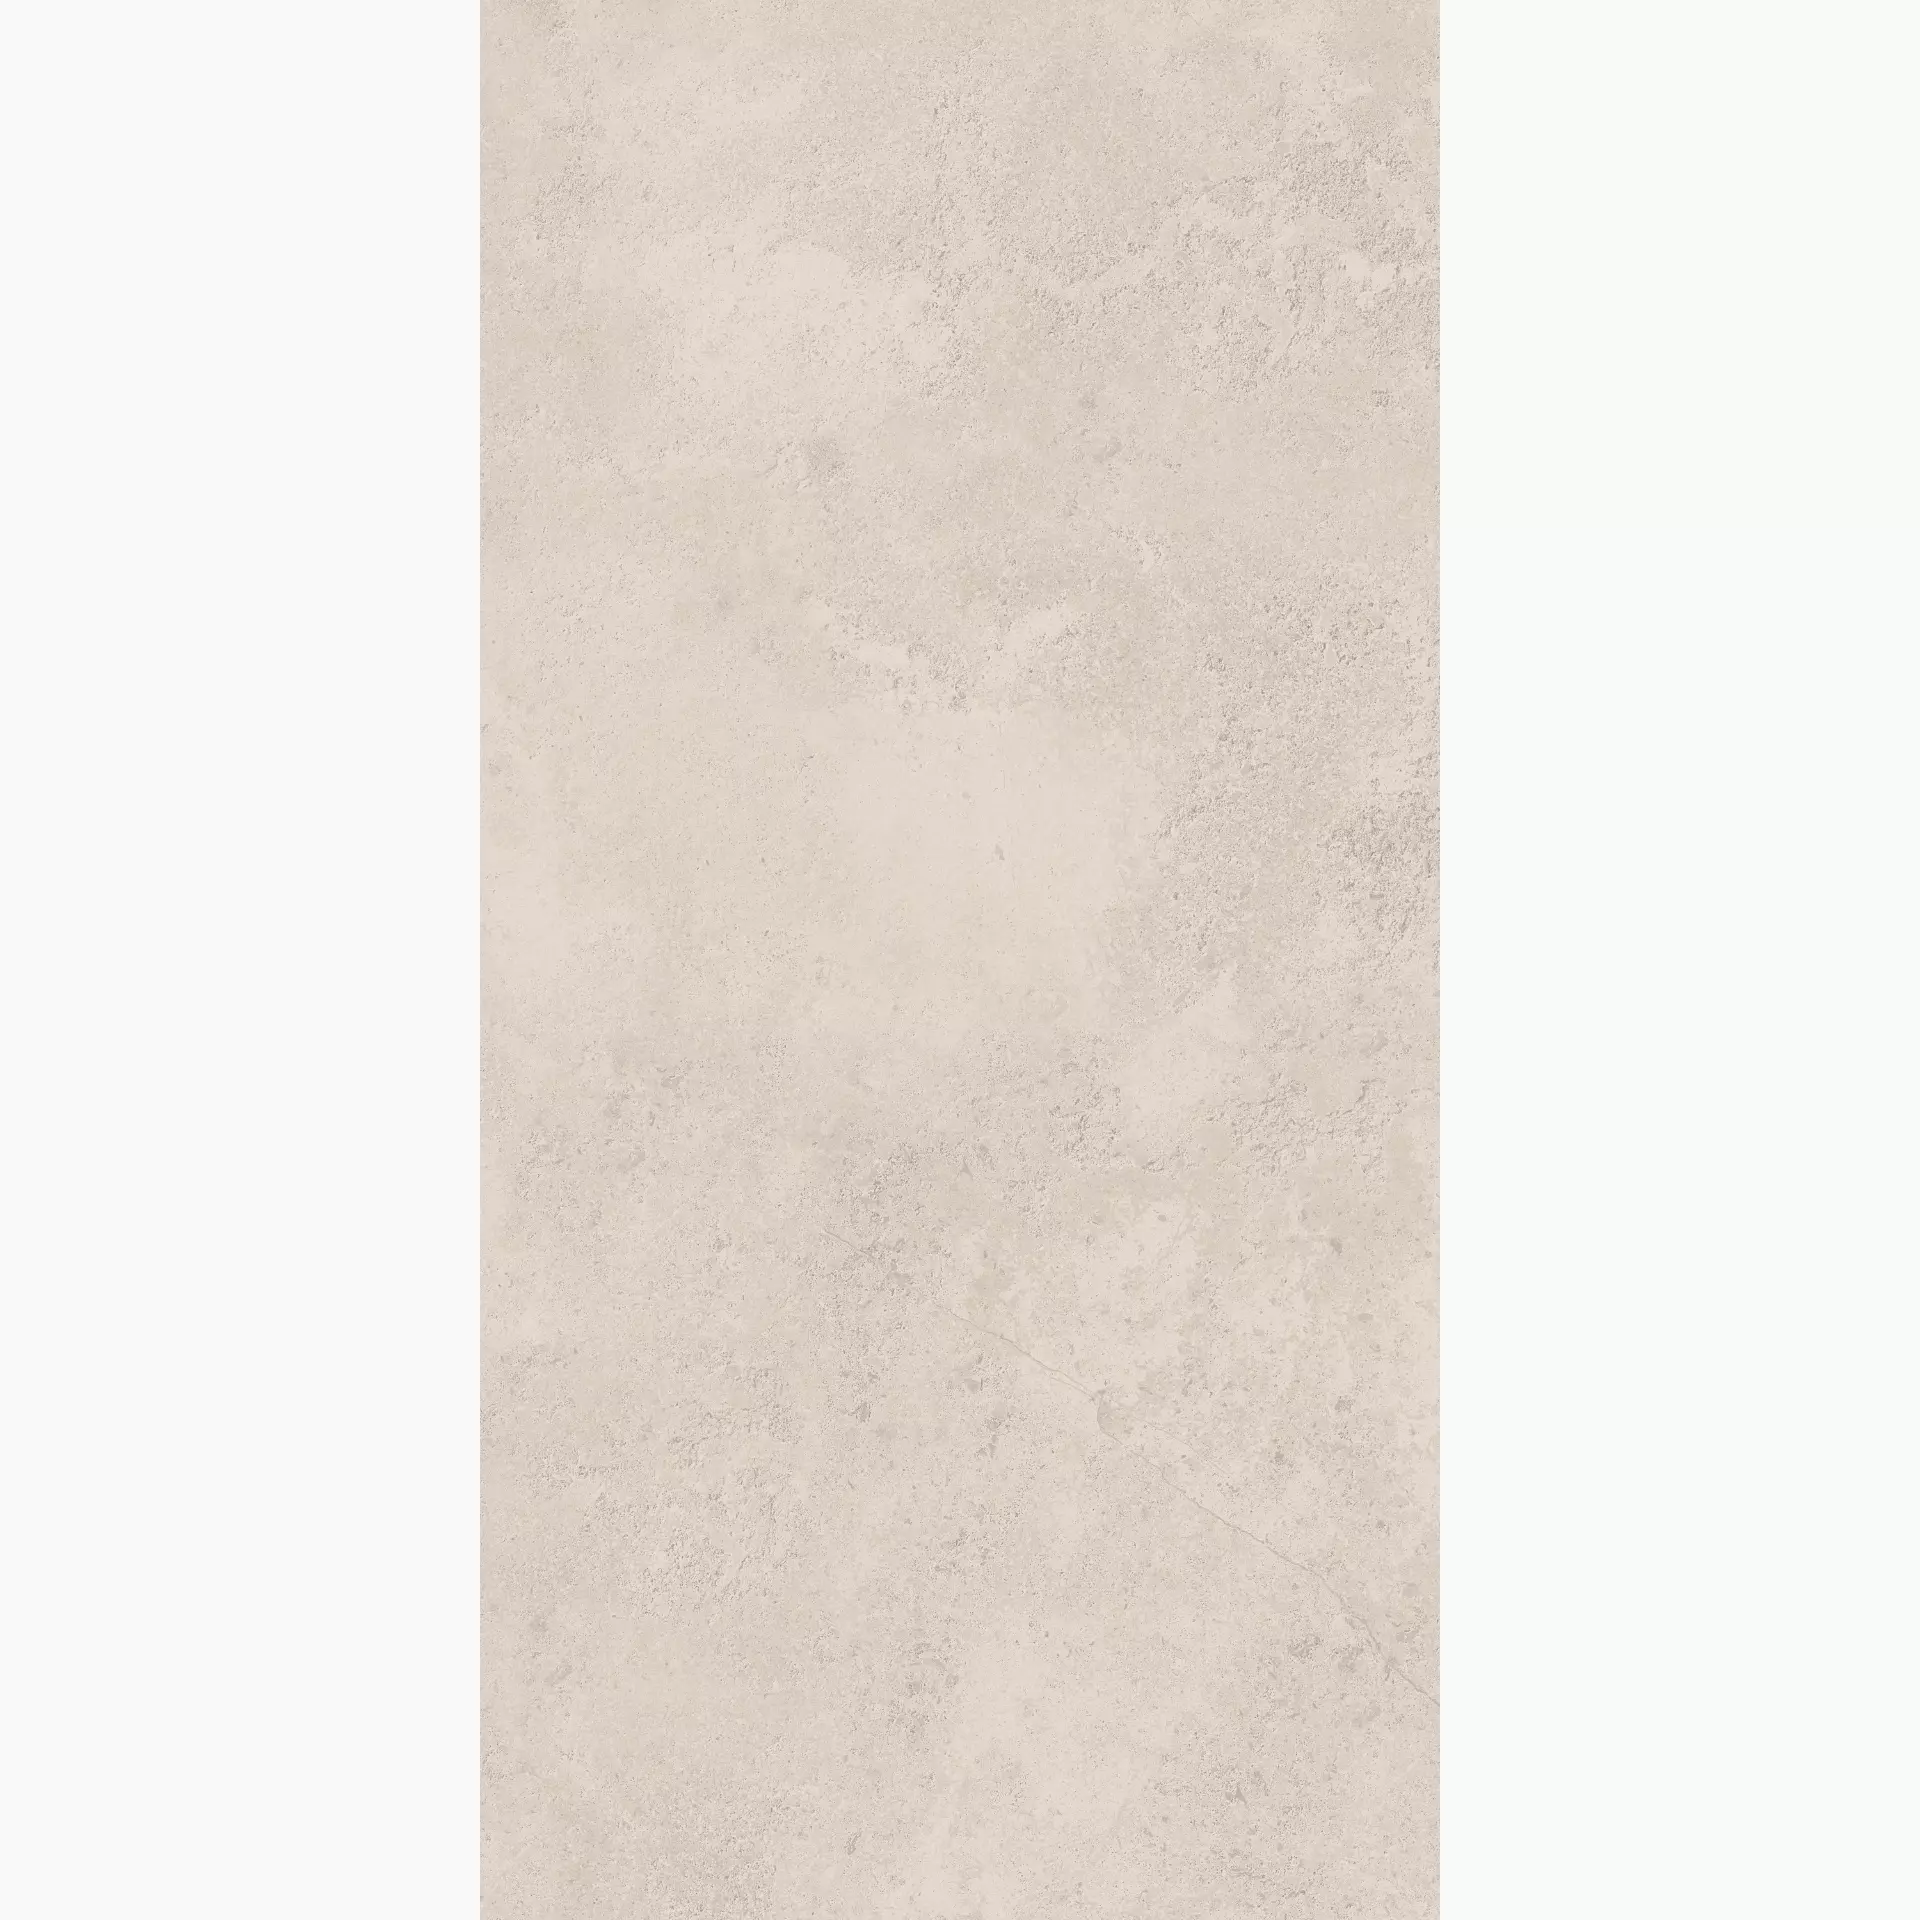 Supergres French Mood Chalon Naturale – Matt FH30 30x60cm rectified 9mm